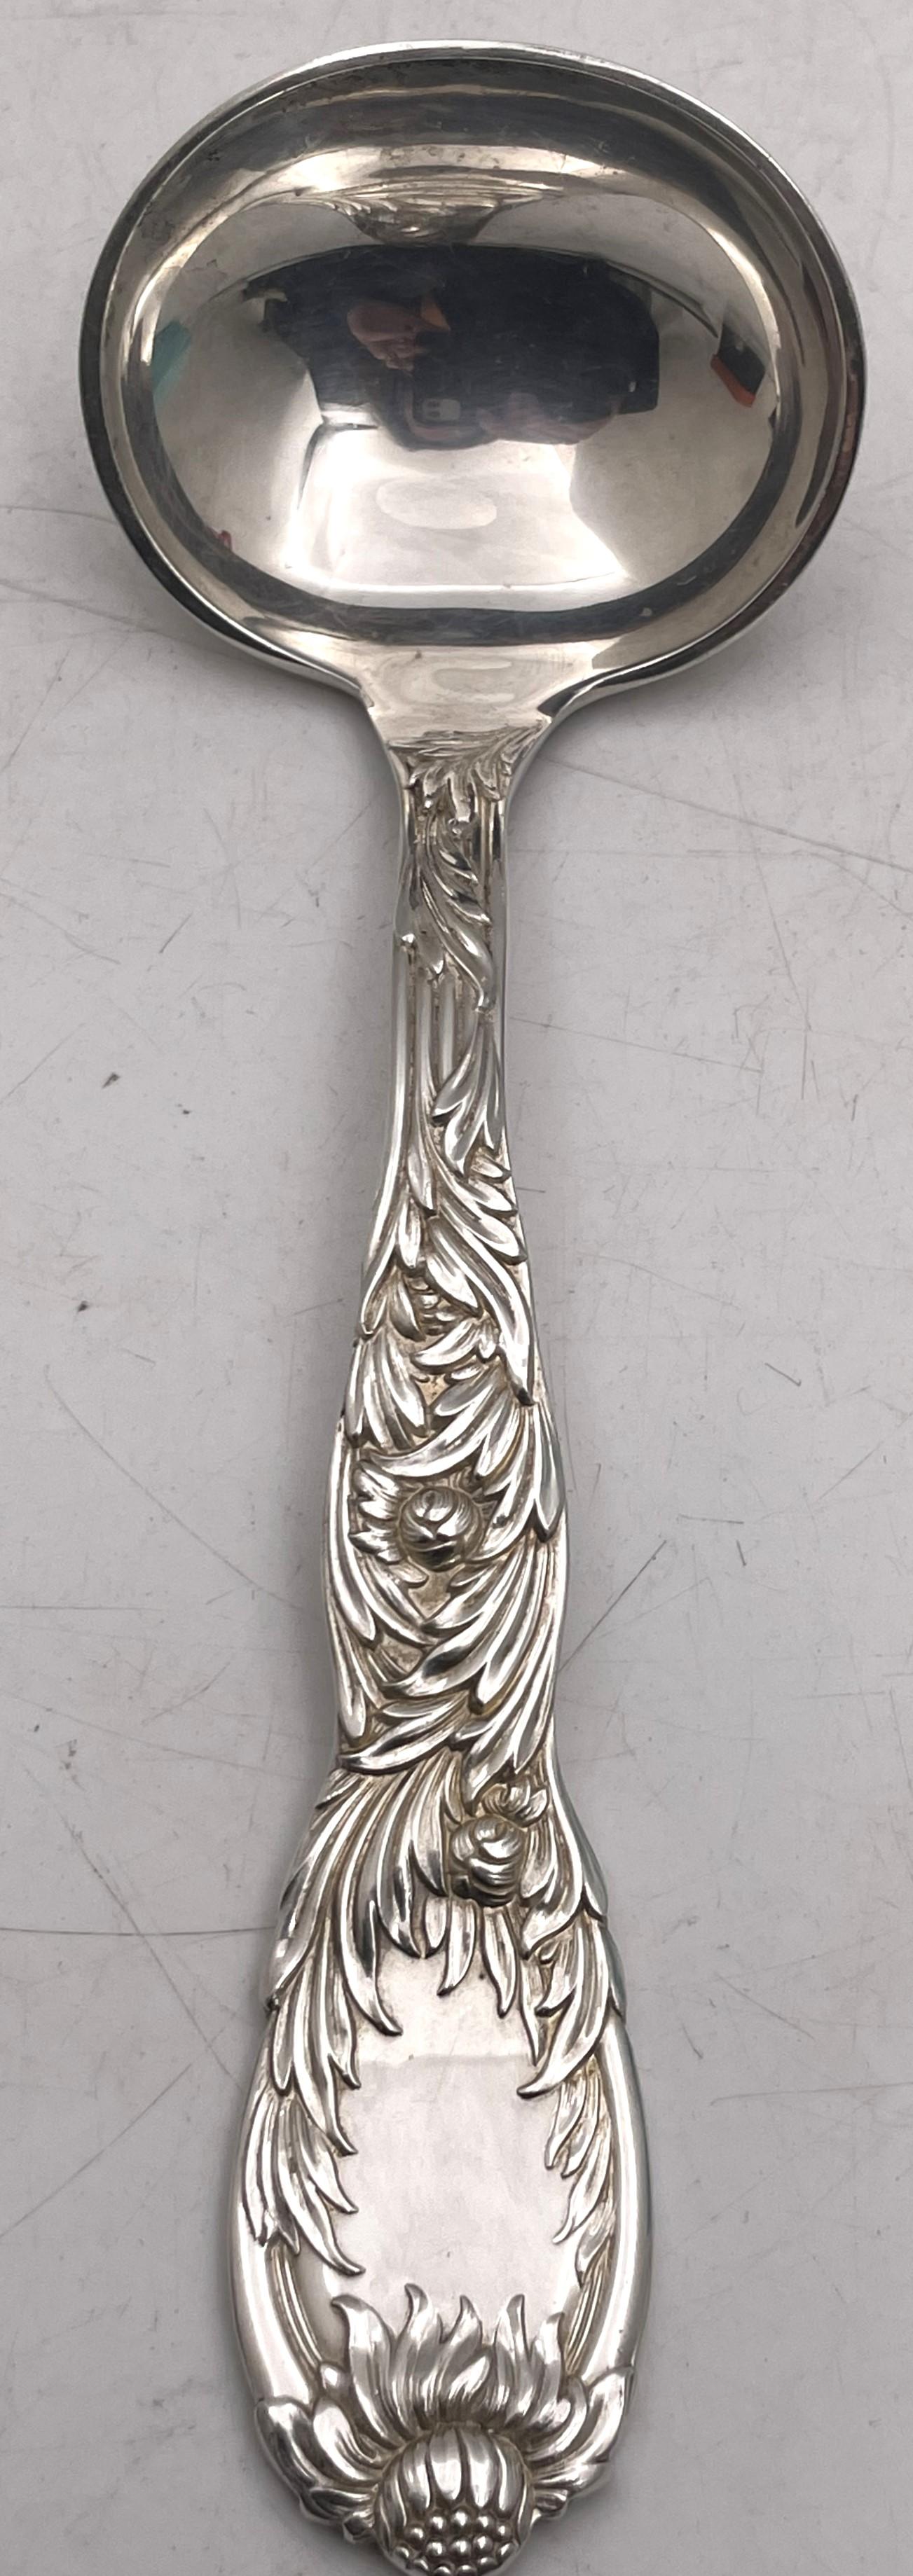 Tiffany & Co. sterling silver gravy ladle in the celebrated Chrysanthemum pattern, beautifully adorned with chrysanthemum flowers on both sides, measuring 7'' in length, and bearing hallmarks as shown.

Designed by Charles Grosjean and released in